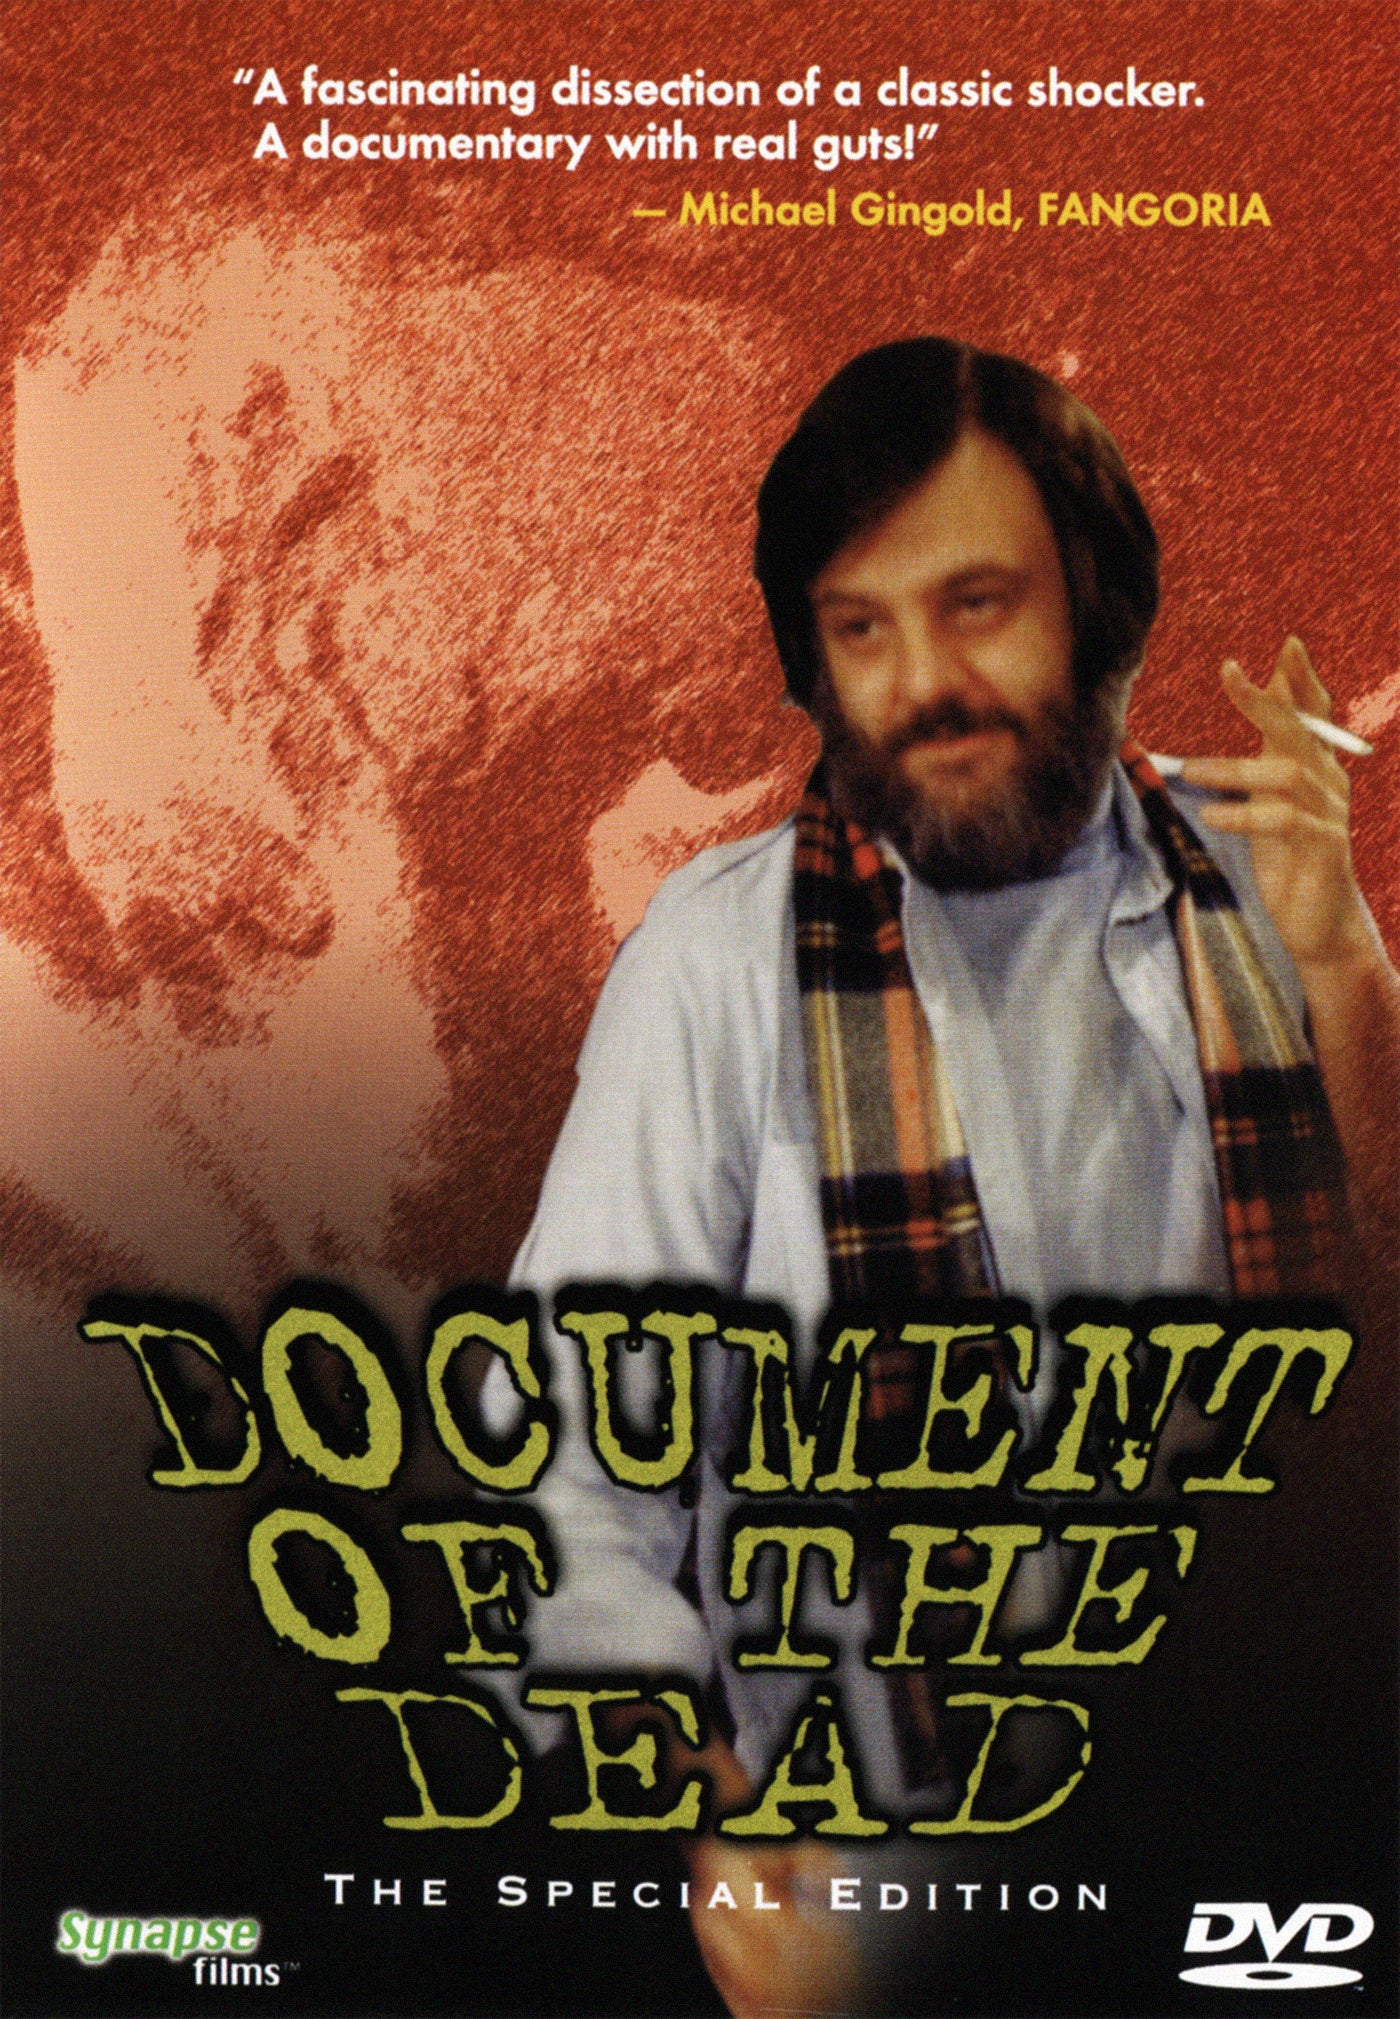 DOCUMENT OF THE DEAD DVD